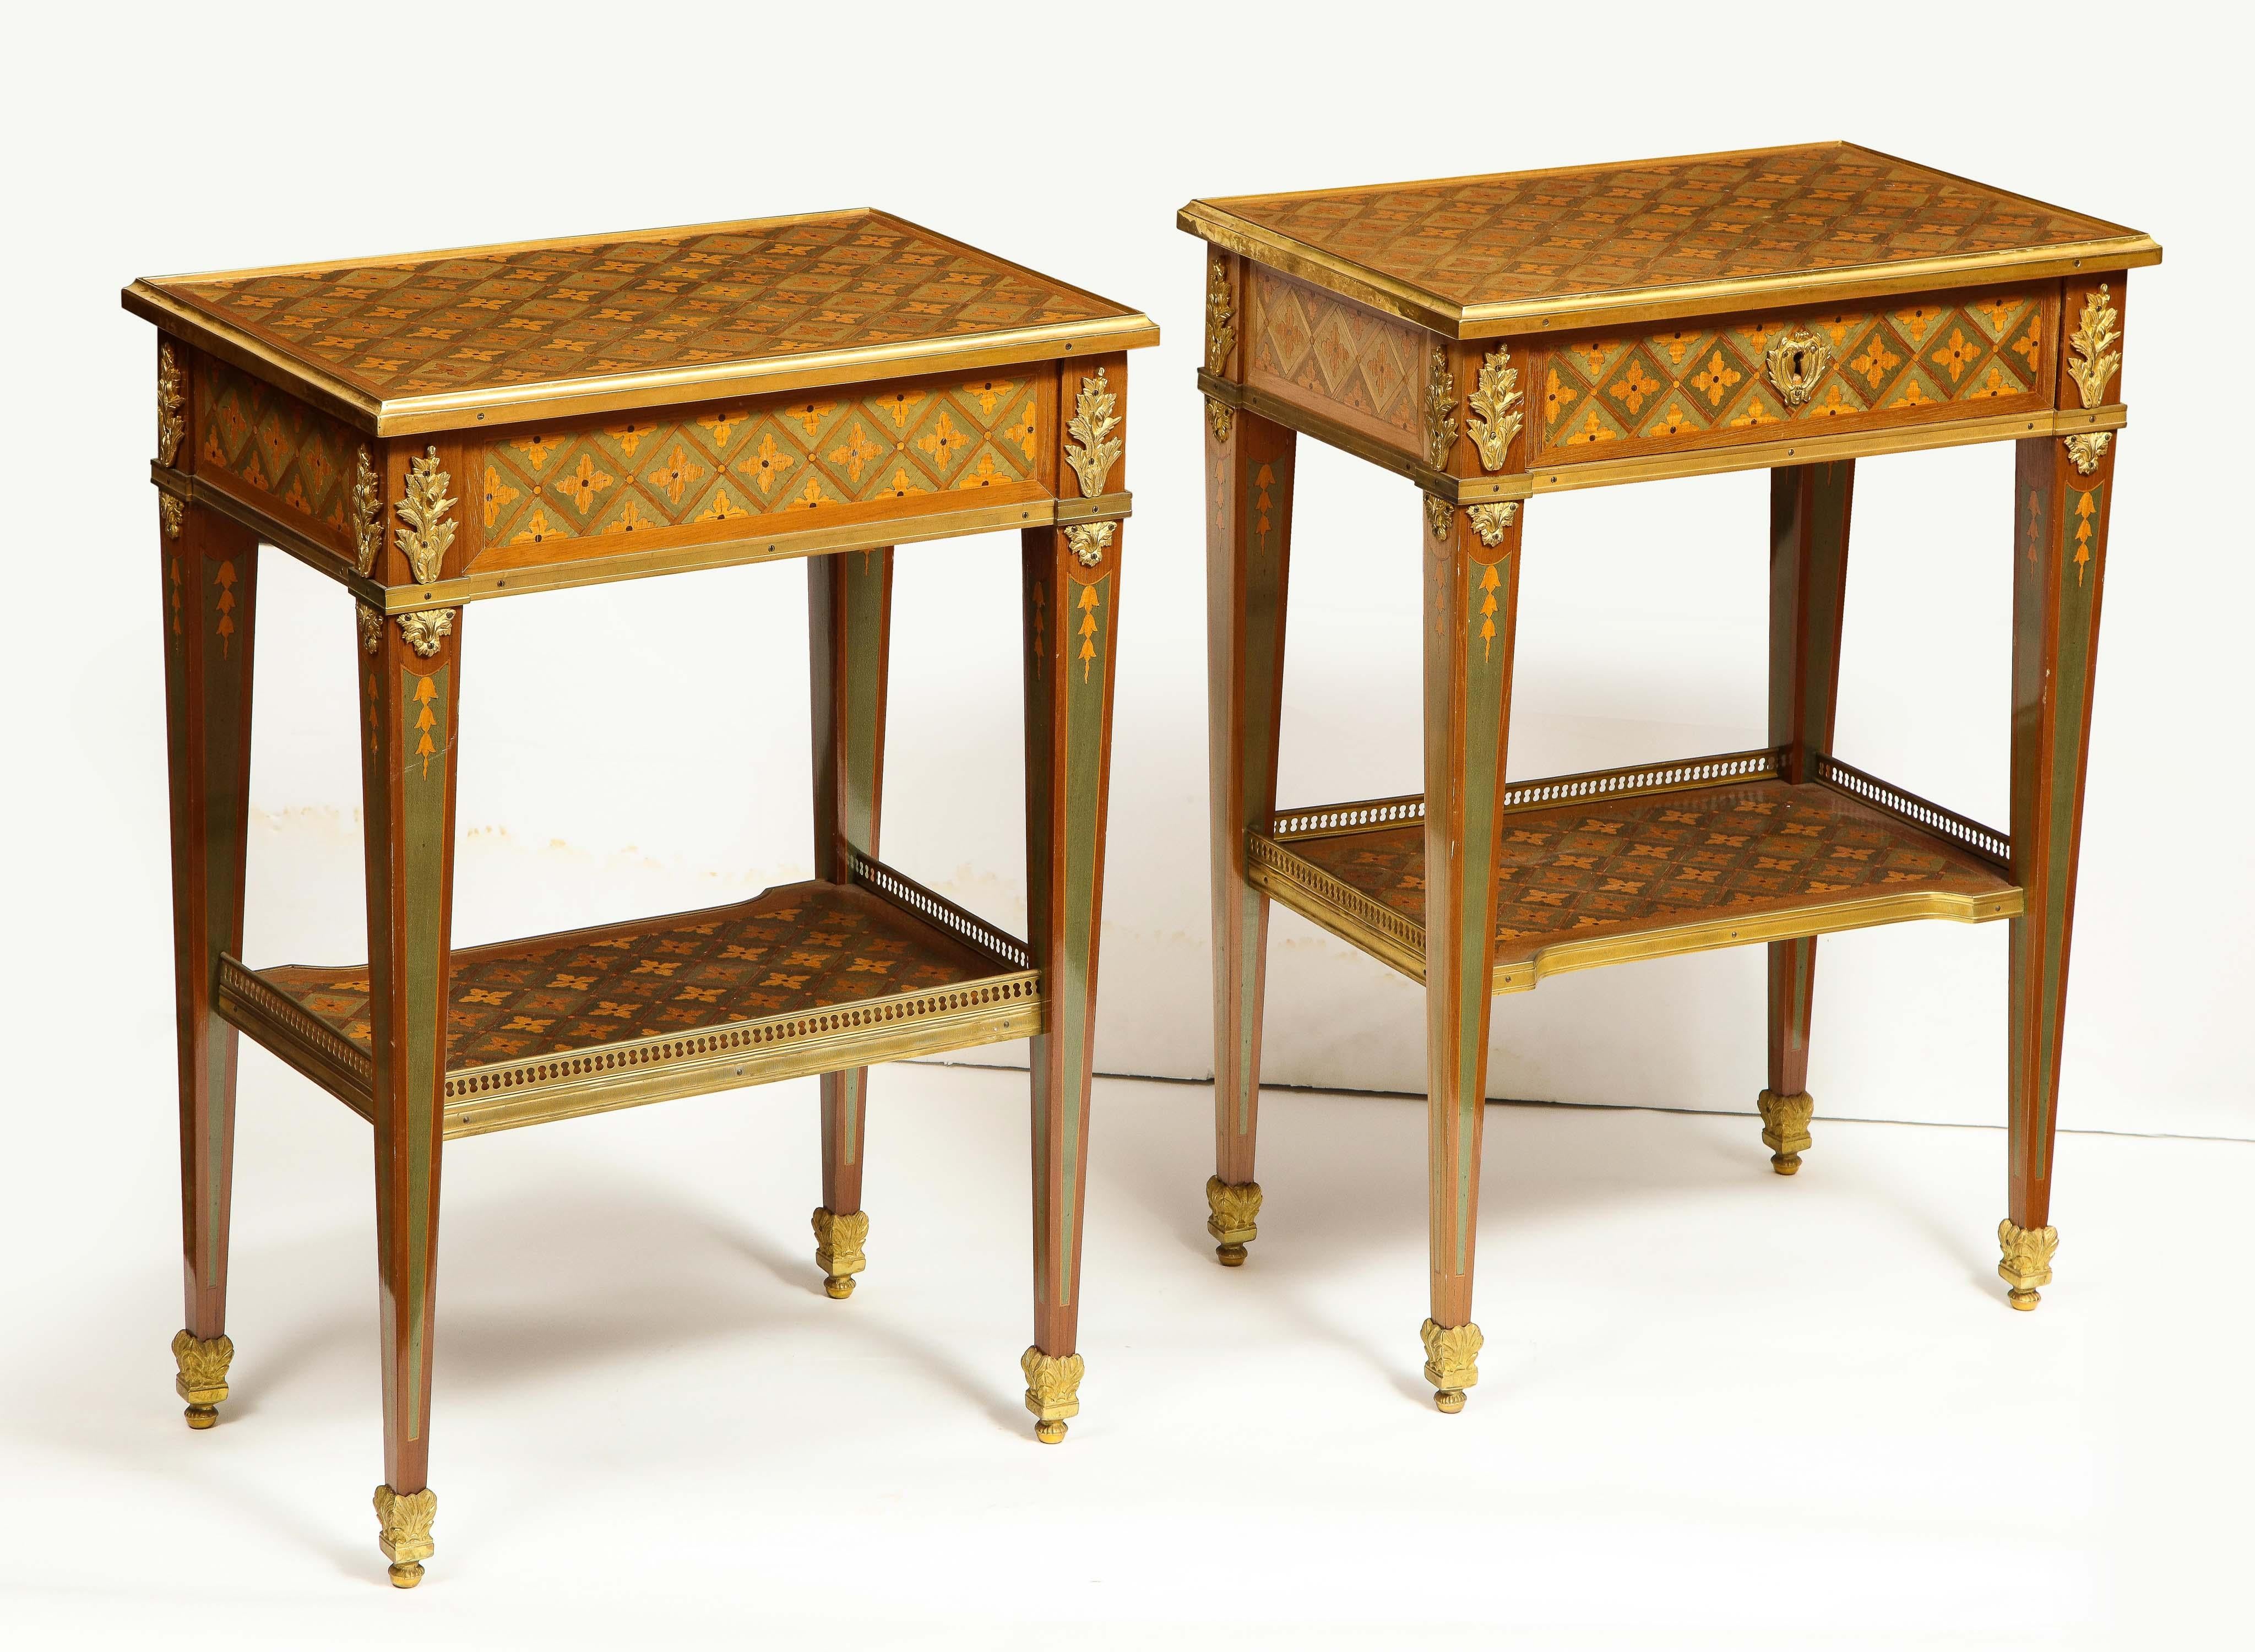 Exceptional Pair of French Ormolu-Mounted Parquetry and Marquetry Side Tables In Good Condition For Sale In New York, NY